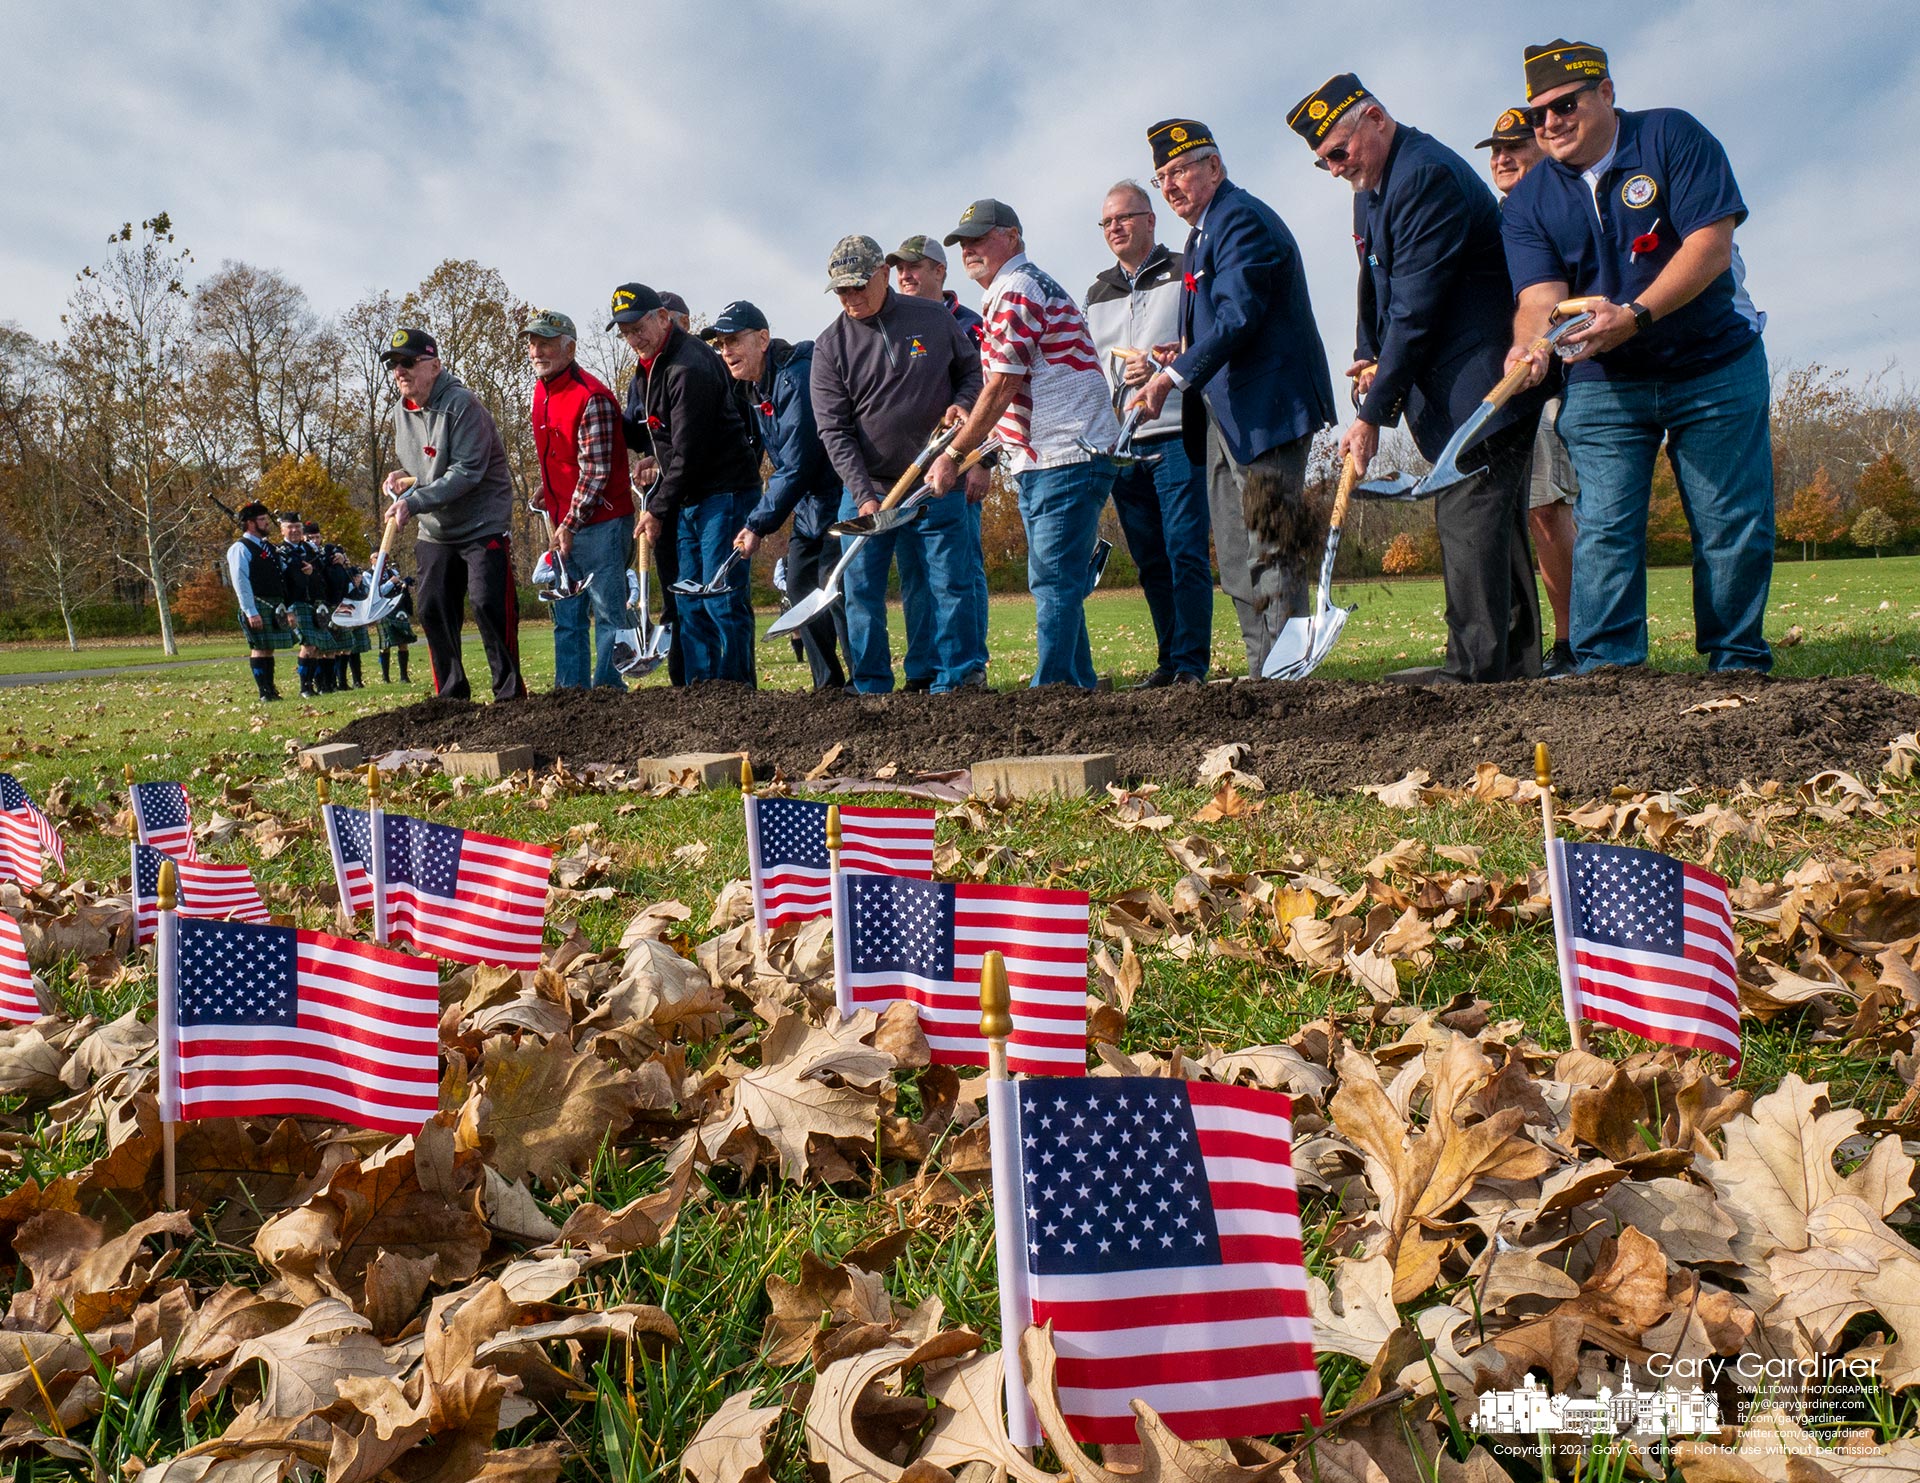 A collection of Westerville veterans participate in groundbreaking ceremonies Thursday for the Veterans Memorial to be built at the Westerville Sports Complex to replace the older memorial at the Armory which will become a co-working office space, brewery, and restaurant. My Final Photo for Nov. 11, 2021.